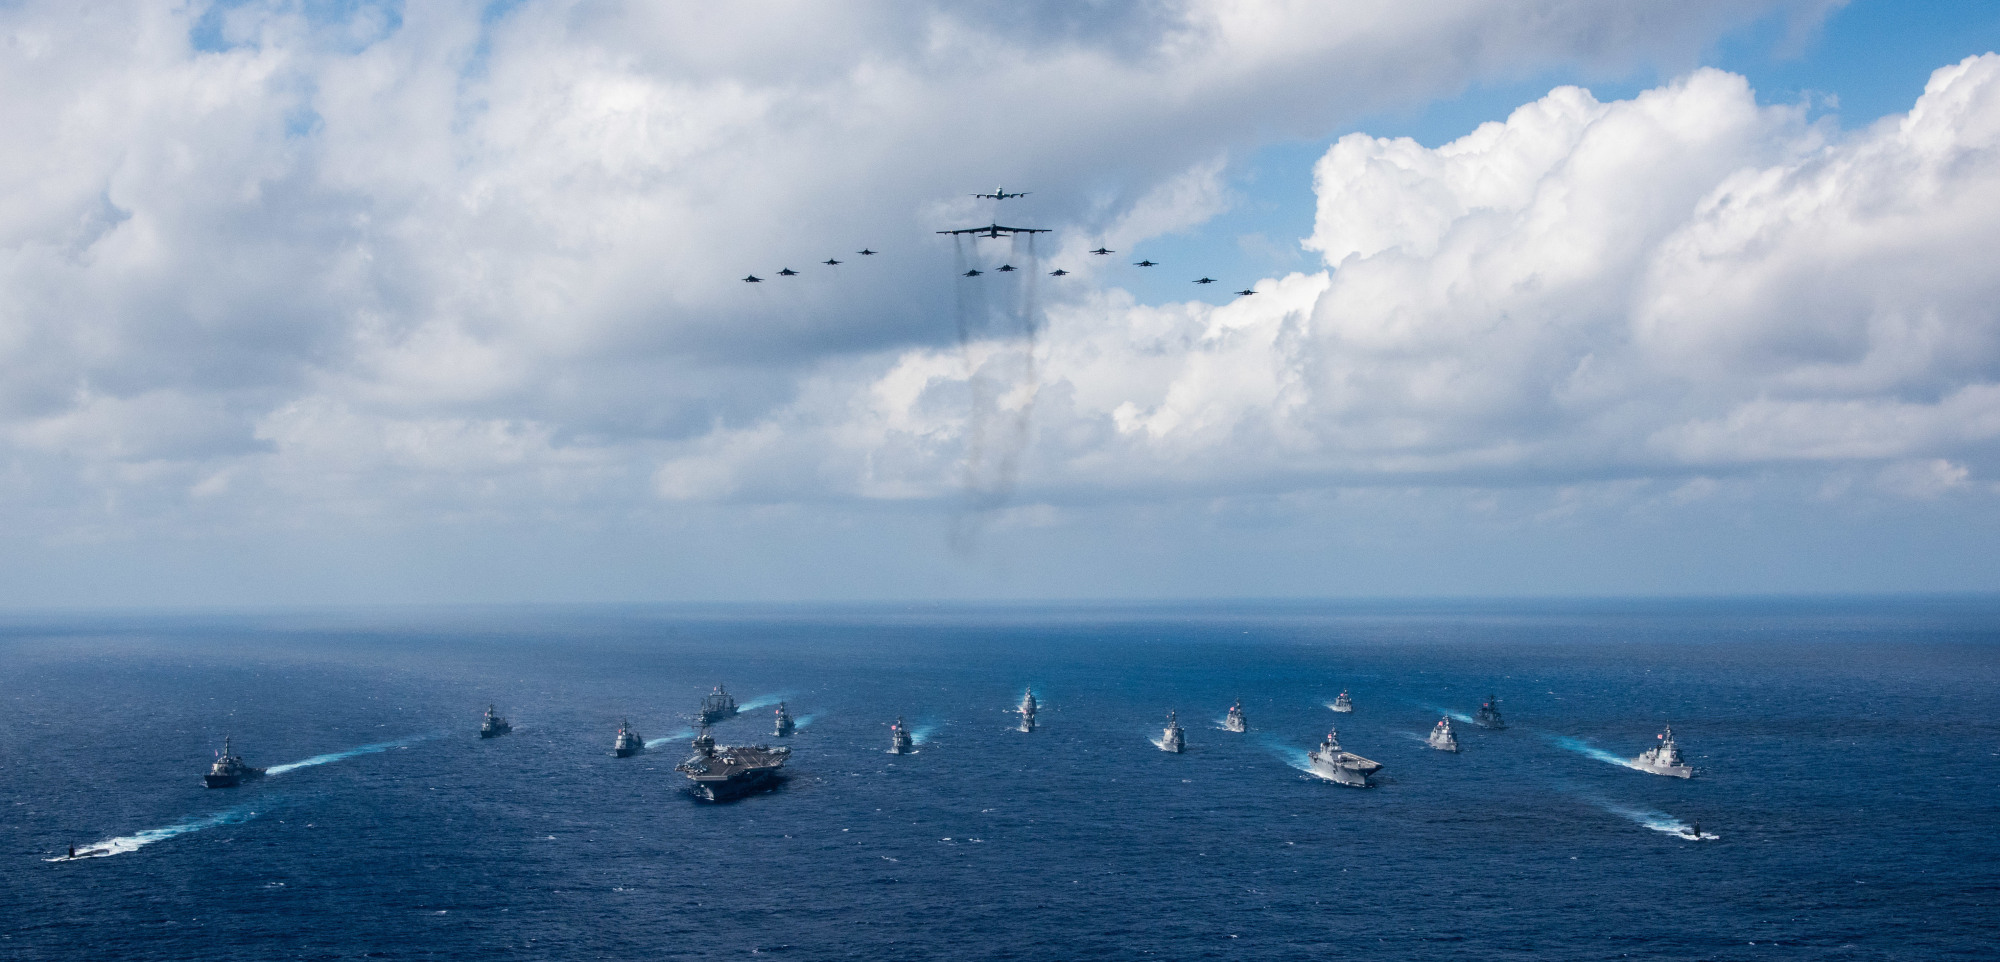 Aircraft and ships of the Self-Defense Forces and the U.S. military  are shown on Nov. 8 participating in Keen Sword 2019, an Indo-Pacific exercise designed to increase combat readiness and interoperability of the Japan-U.S. alliance. | COMMANDER, U.S. 7TH FLEET